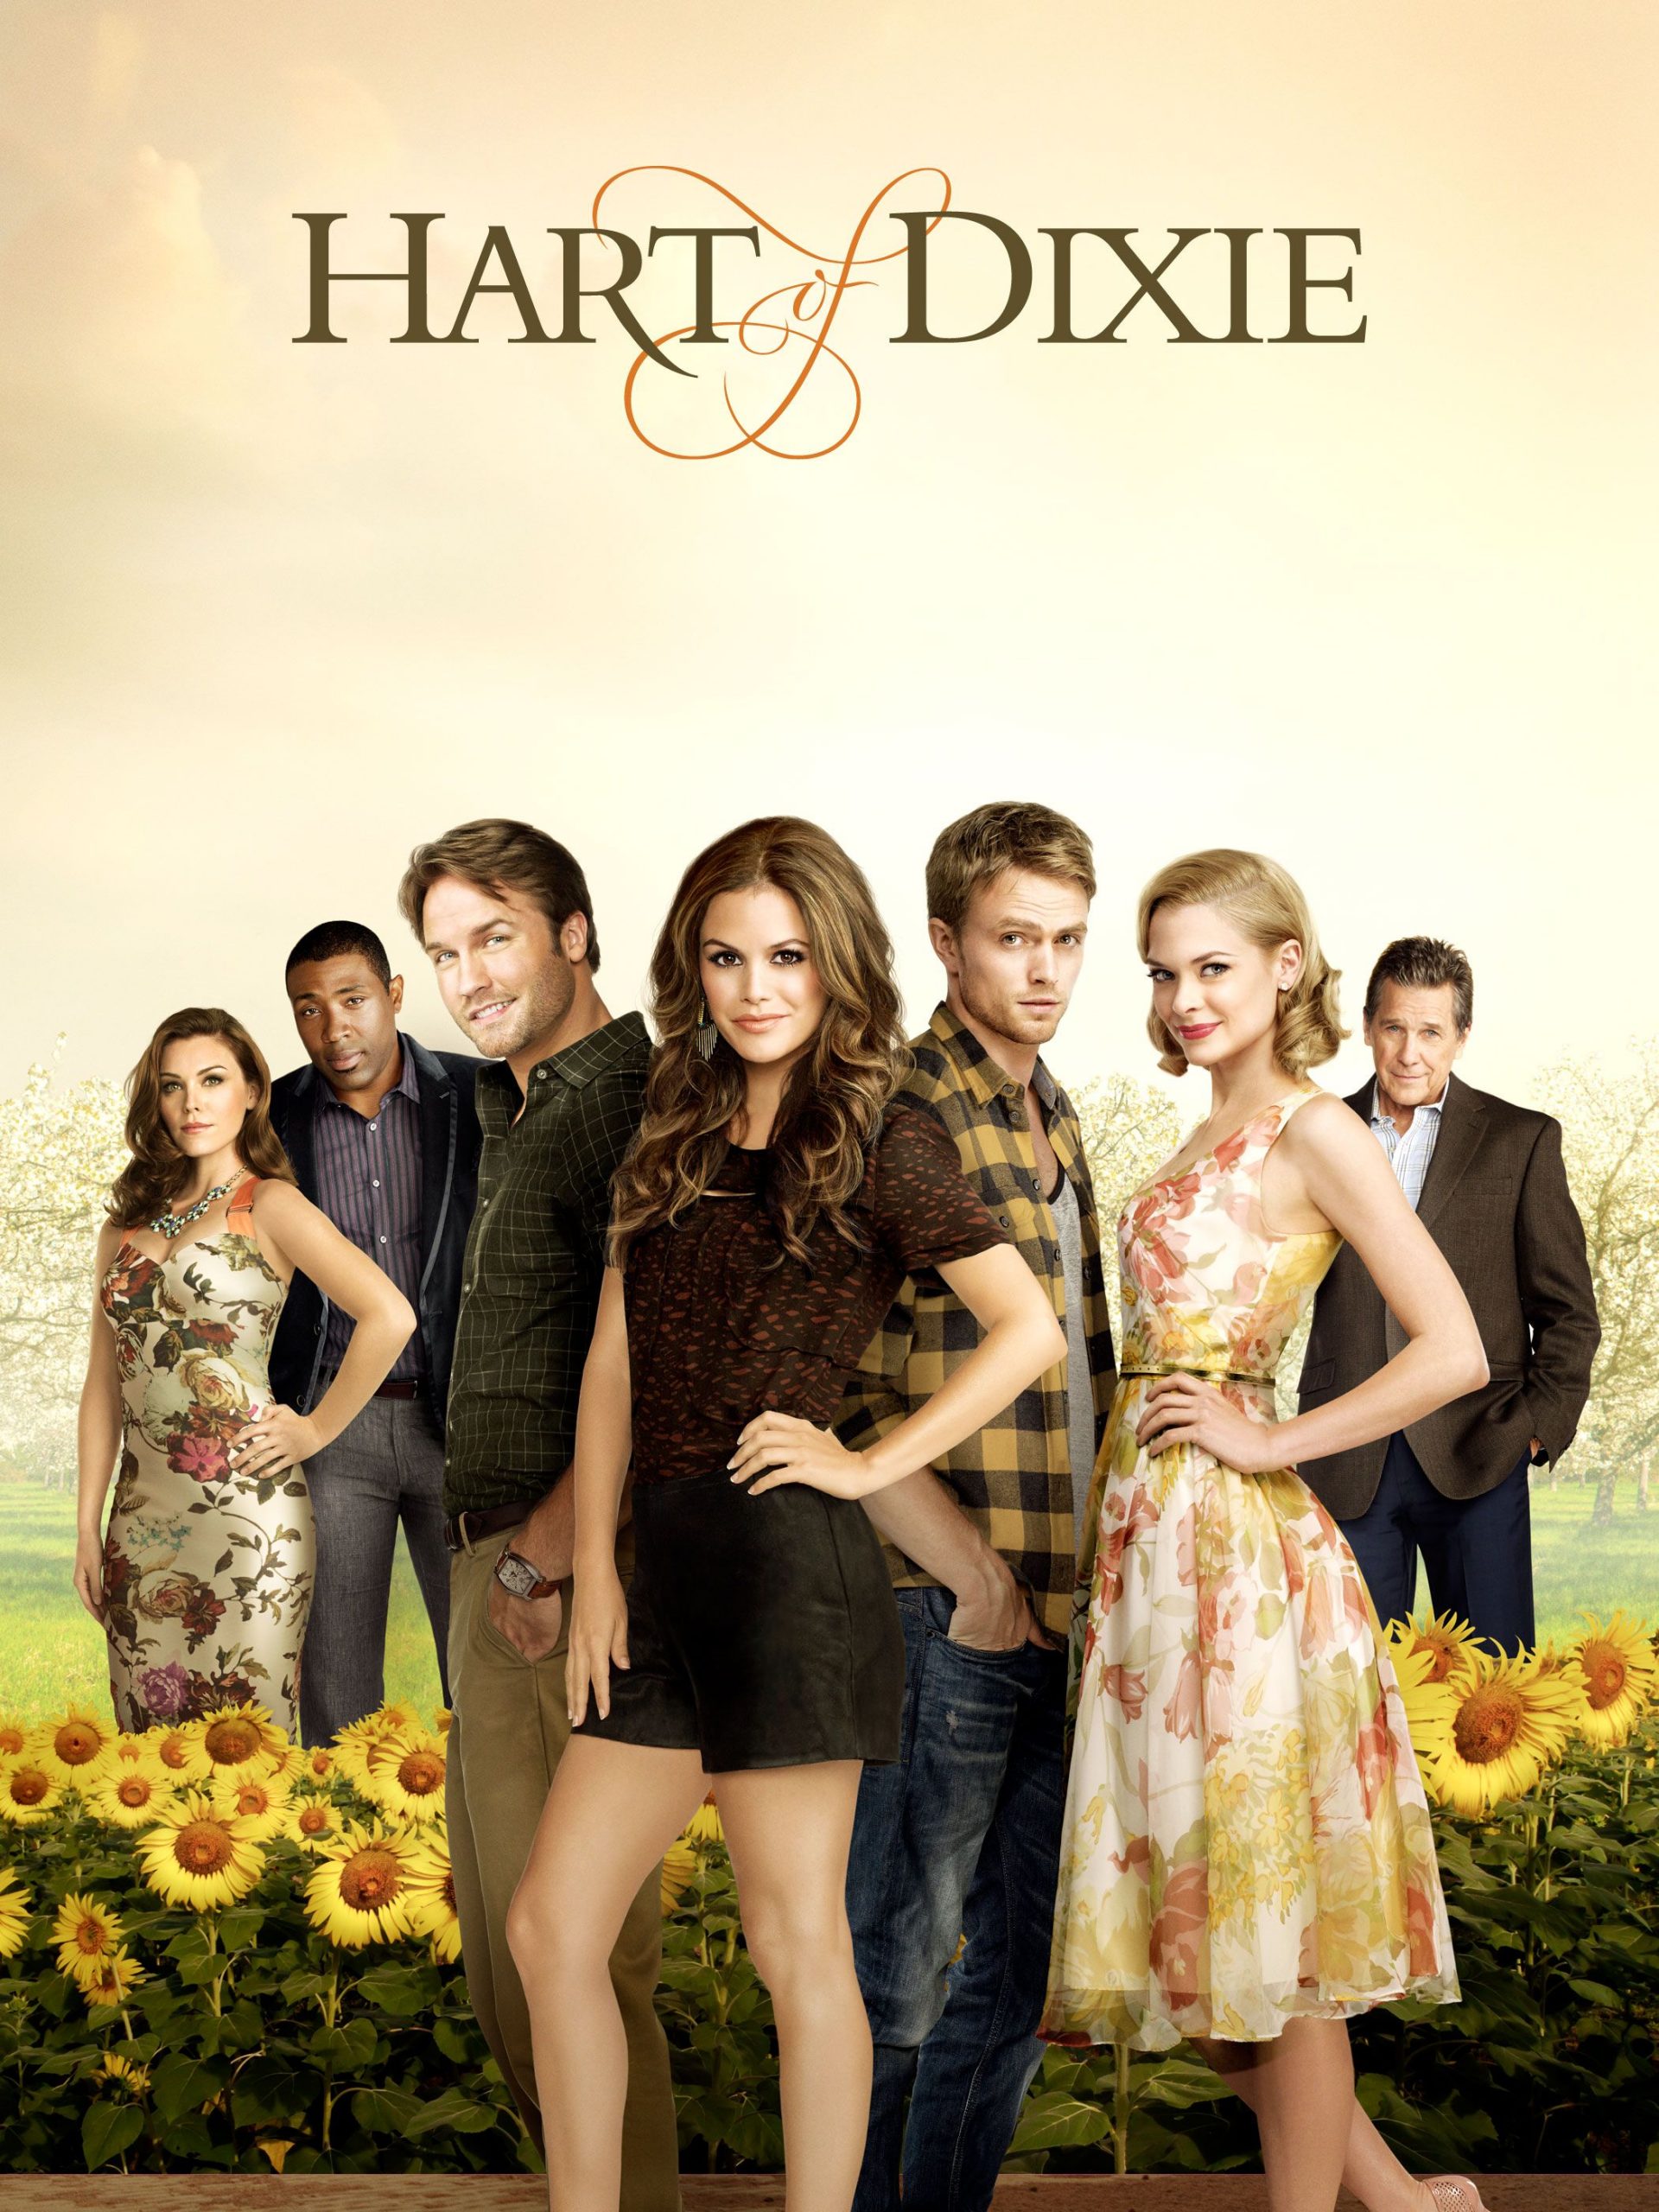 Hart Of Dixie Cast In Real Life 2020 2 Scaled 